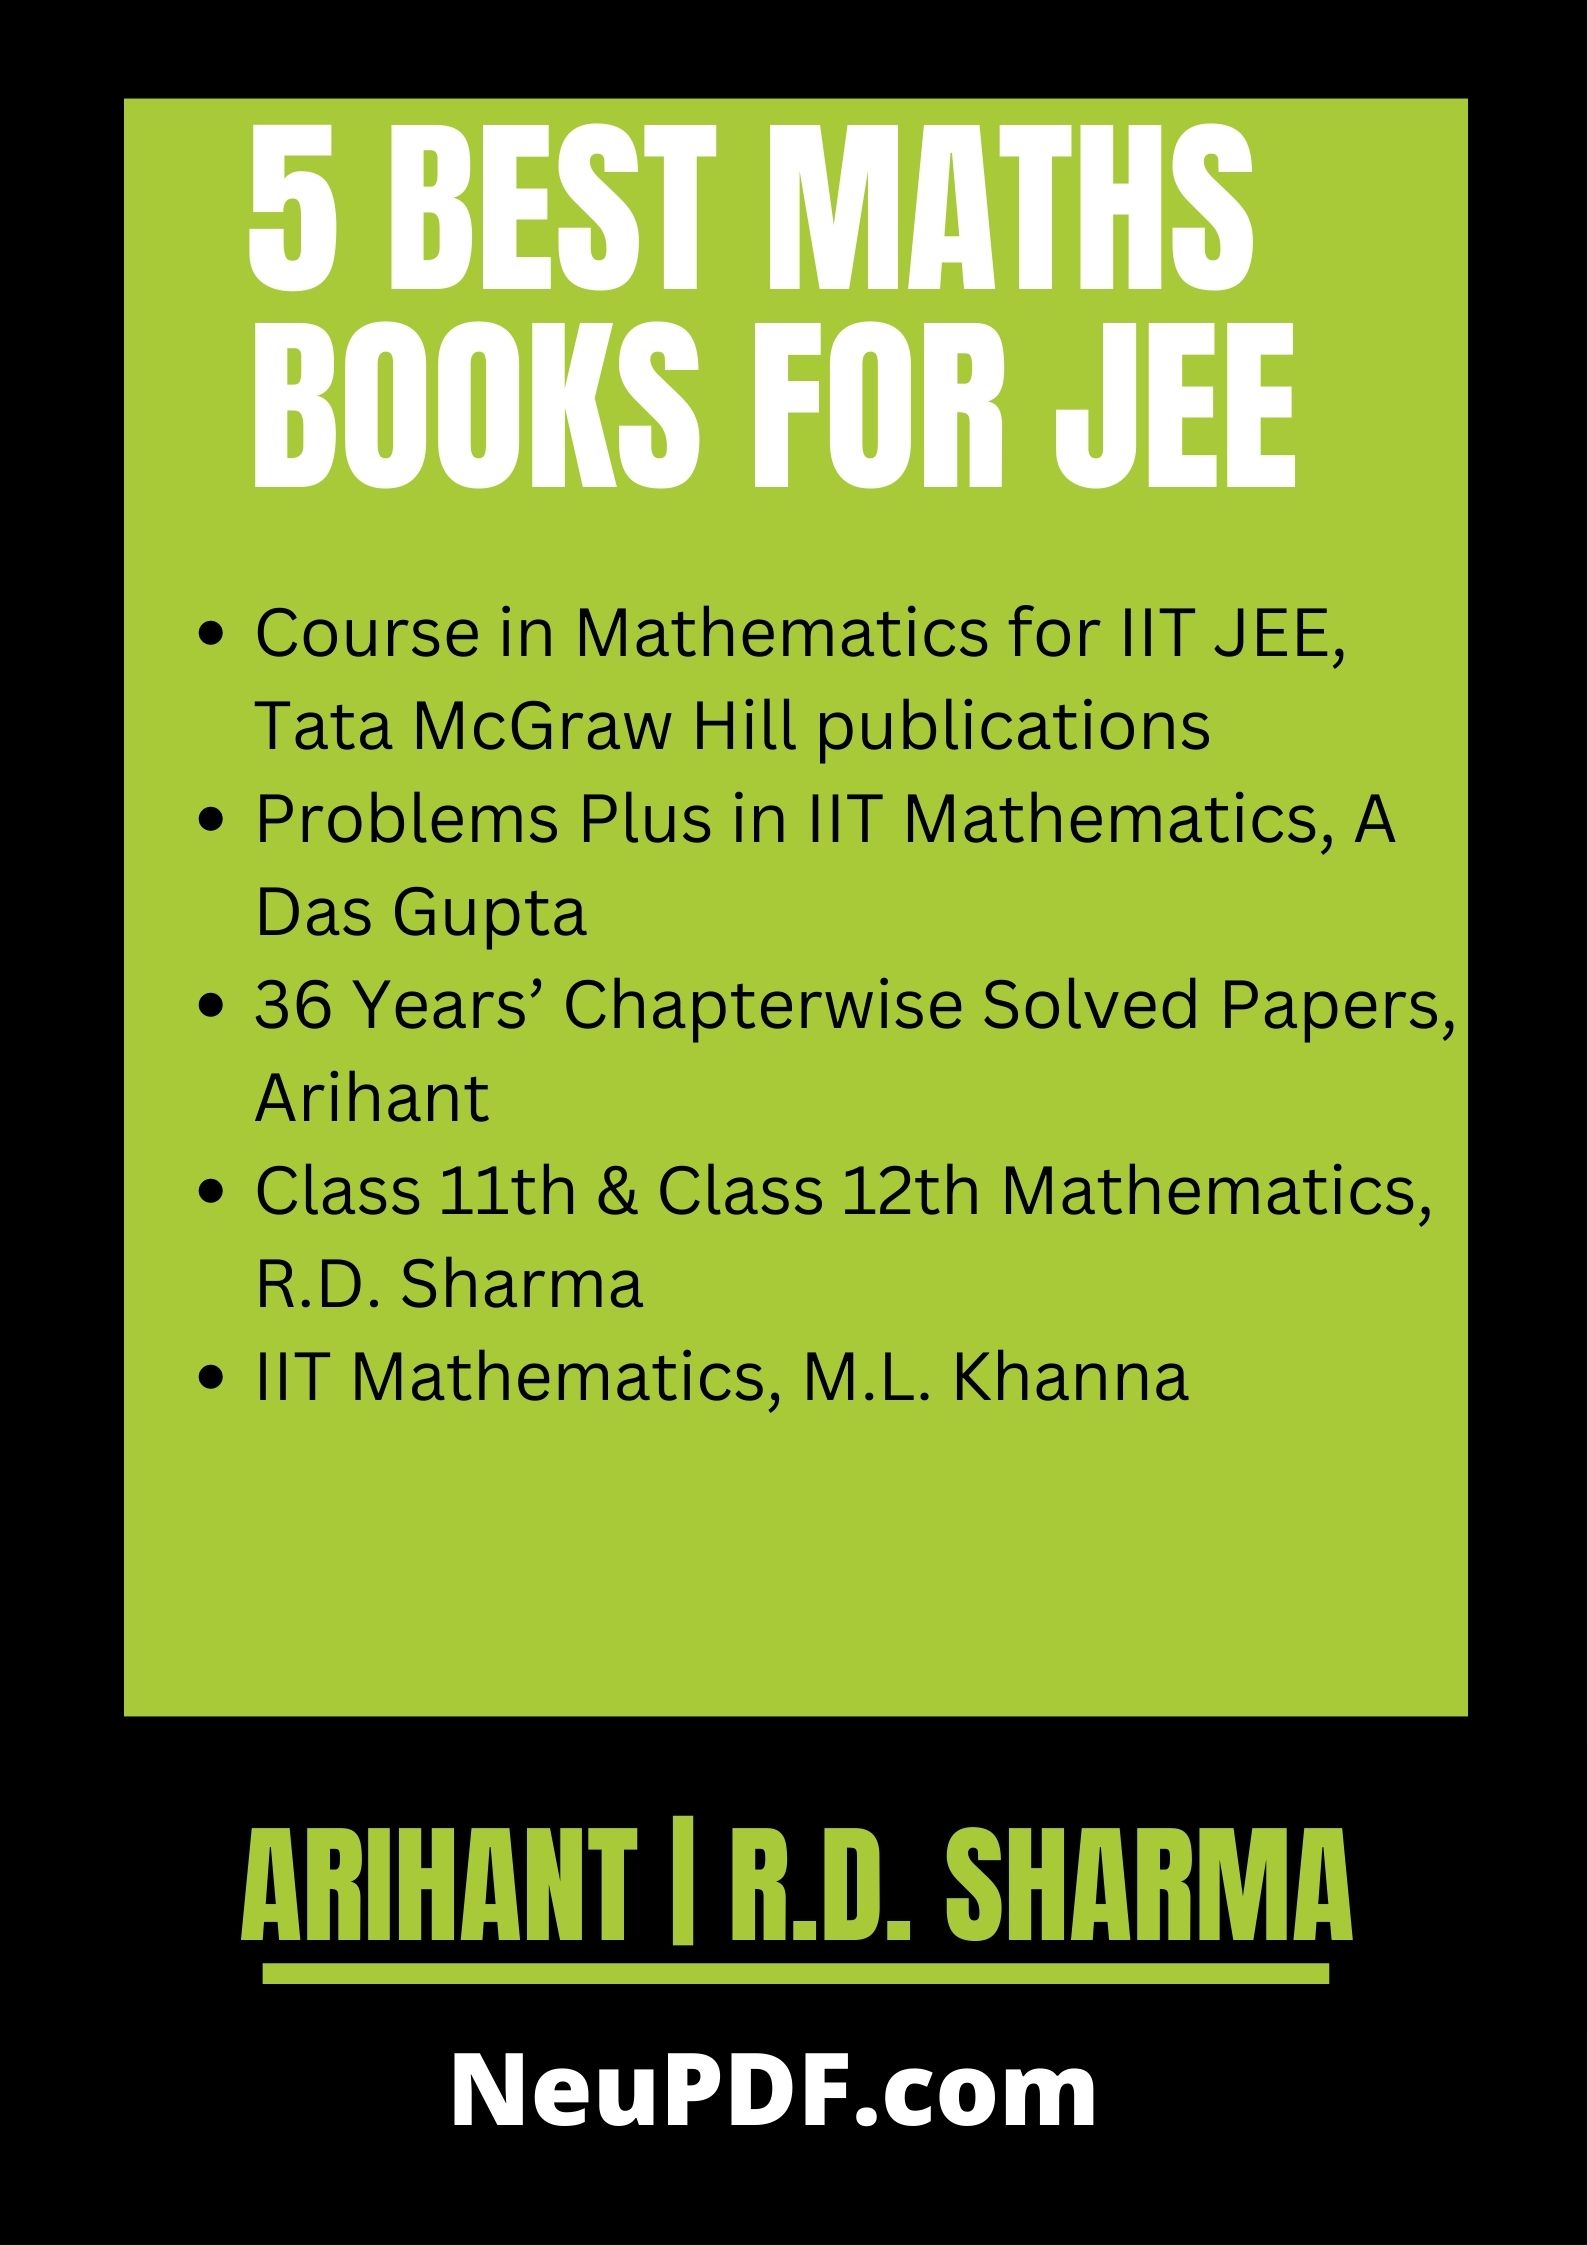 5 Best Maths Book for JEE